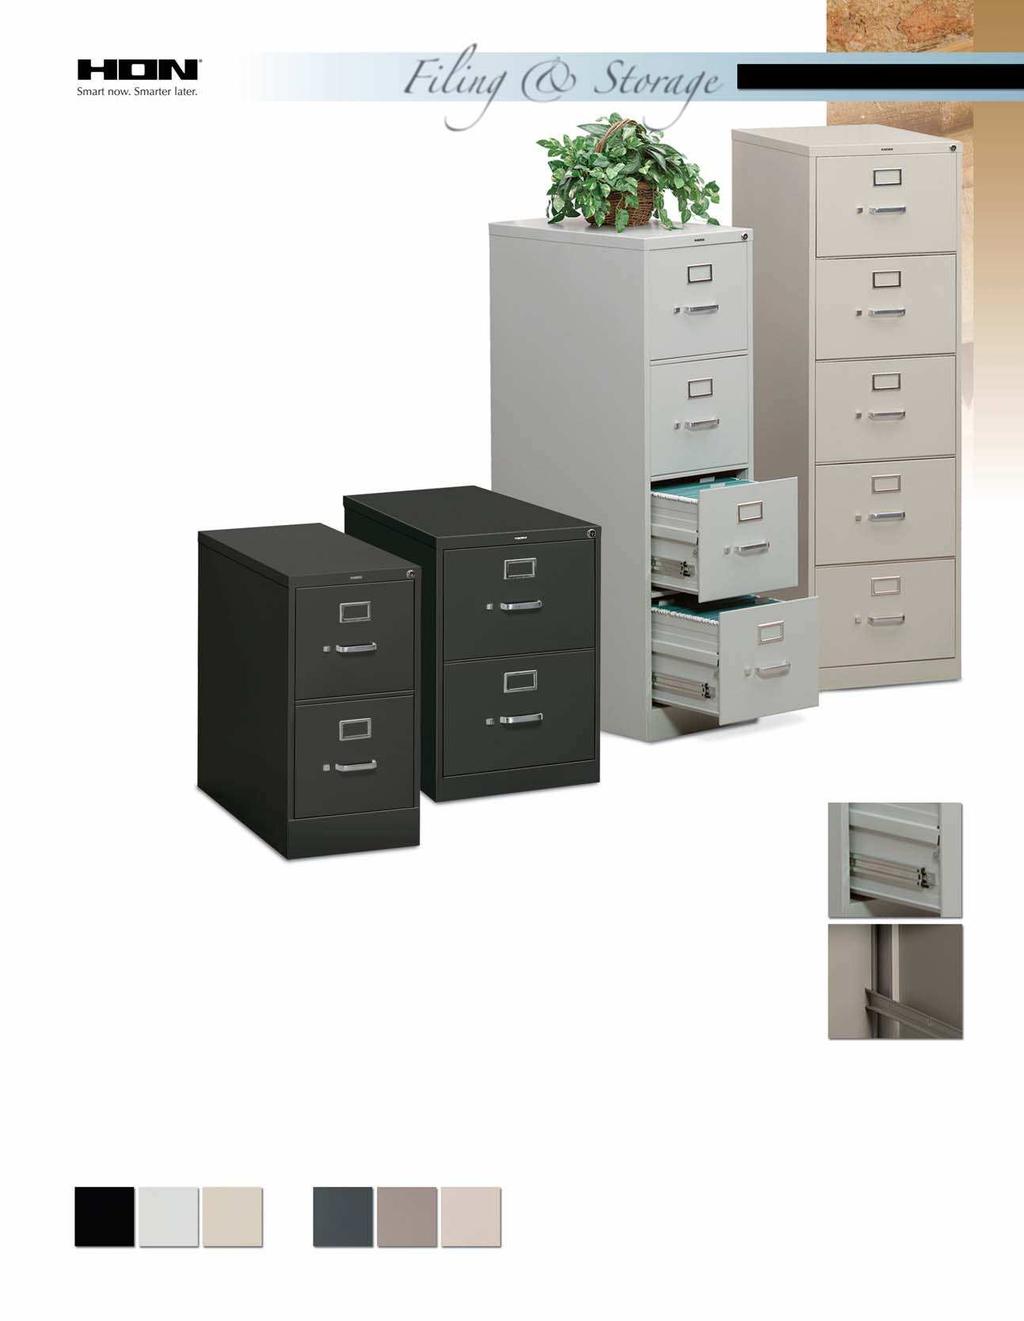 310 Series Vertical Files are certified by Scientific Certification Systems (SCS) to be in quality emission Thumb latch keeps drawers safely closed. Three-part telescoping ball-bearing drawers.